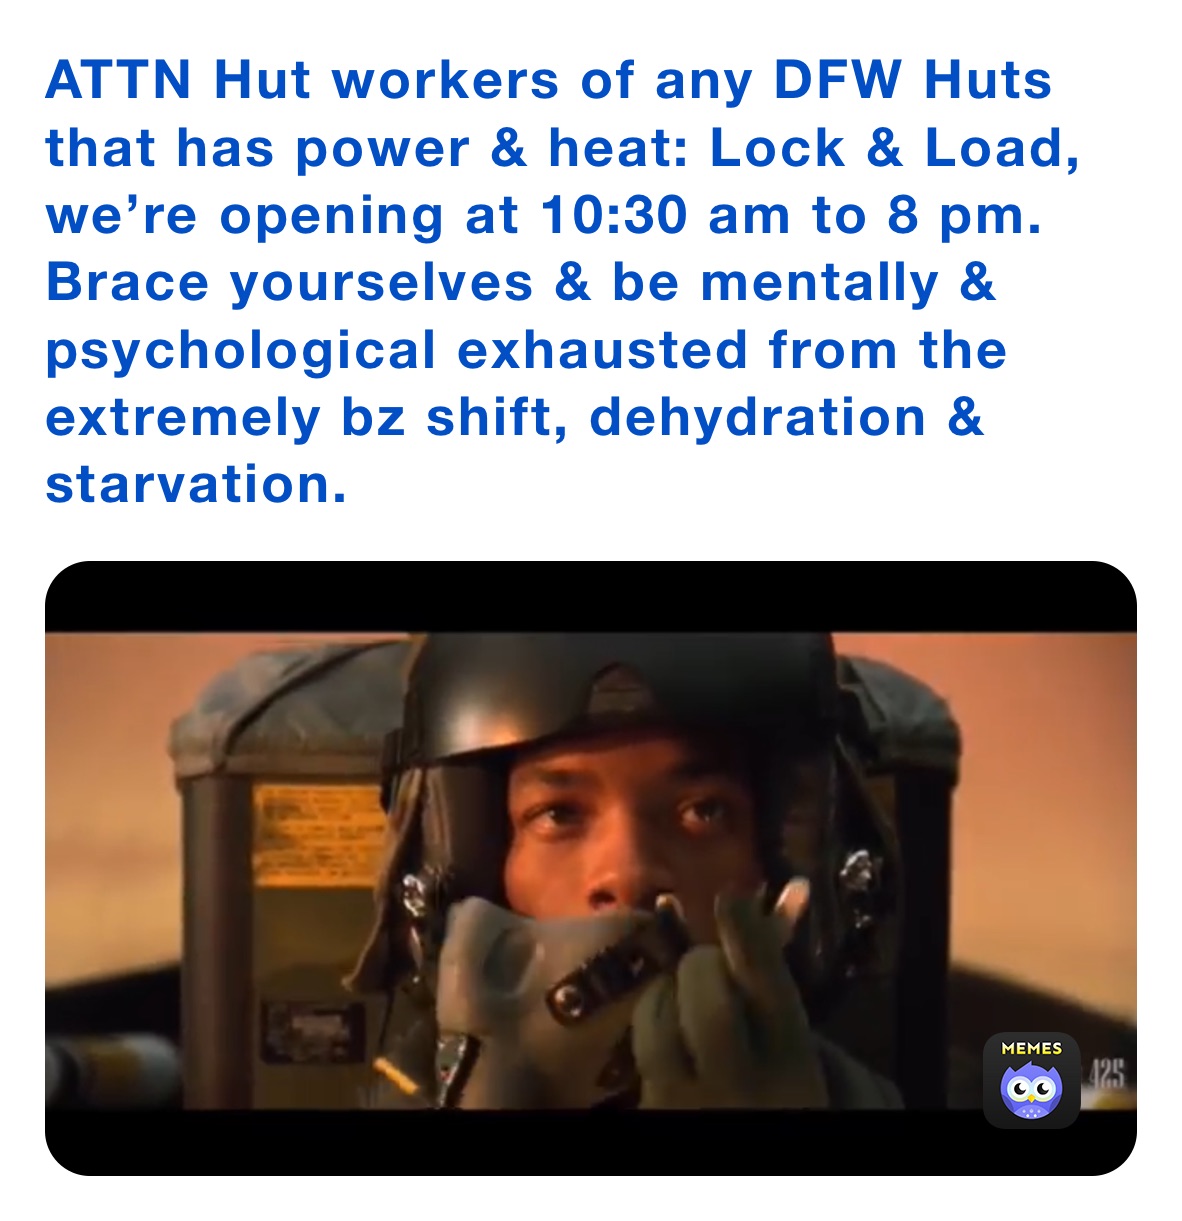 ATTN Hut workers of any DFW Huts that has power & heat: Lock & Load, we’re opening at 10:30 am to 8 pm. Brace yourselves & be mentally & psychological exhausted from the extremely bz shift, dehydration & starvation.